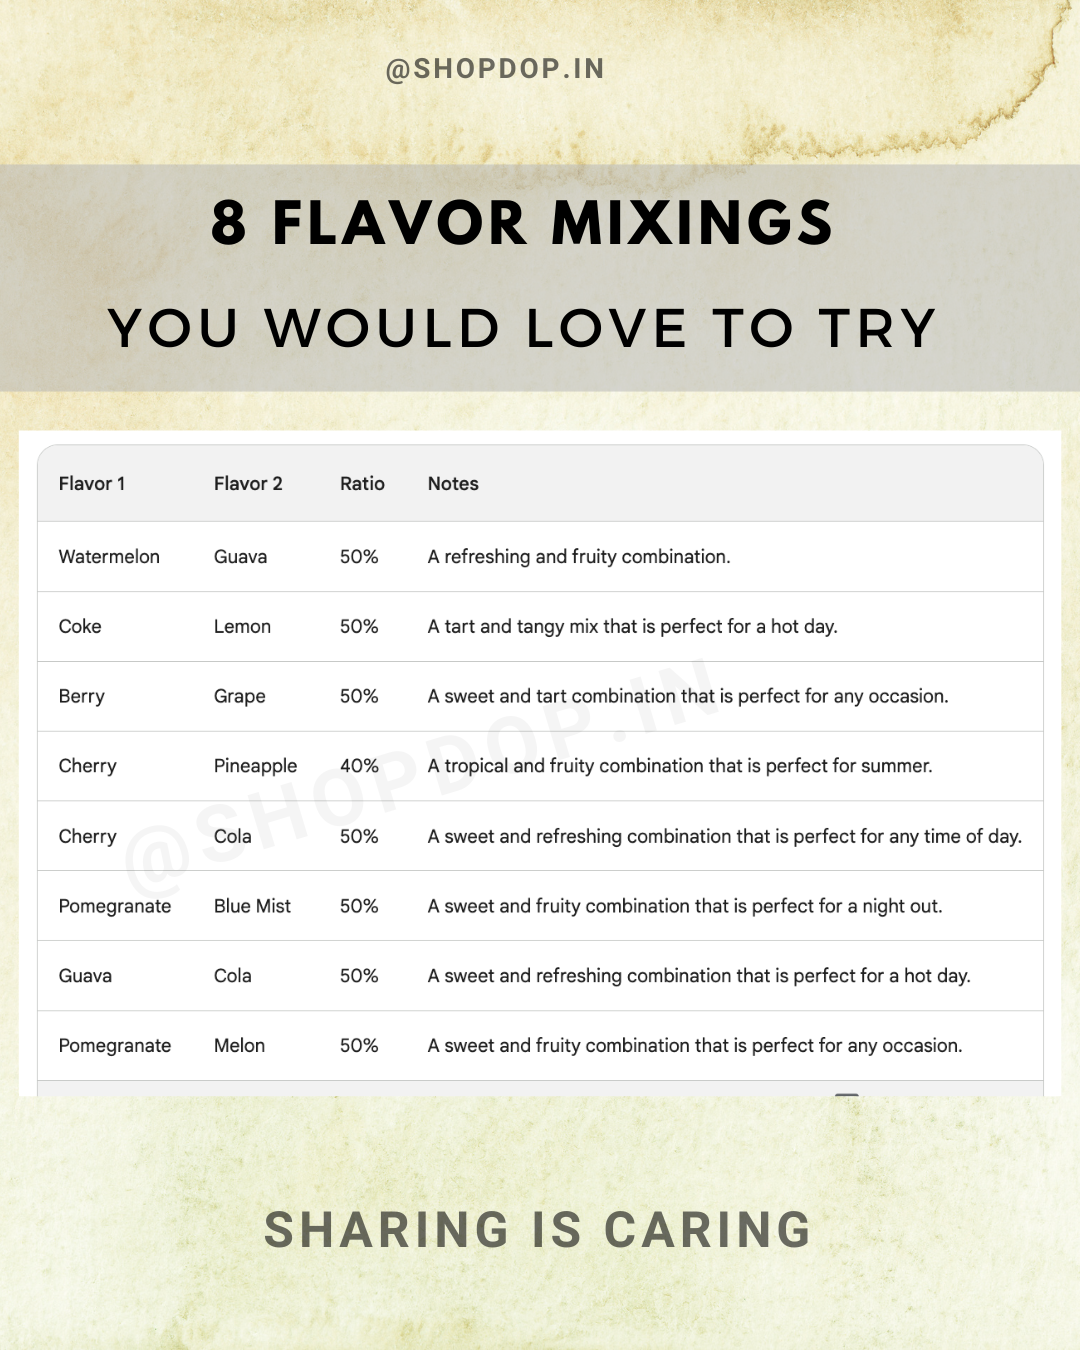 mixing of 8 different hookah flavors, you would love to try.